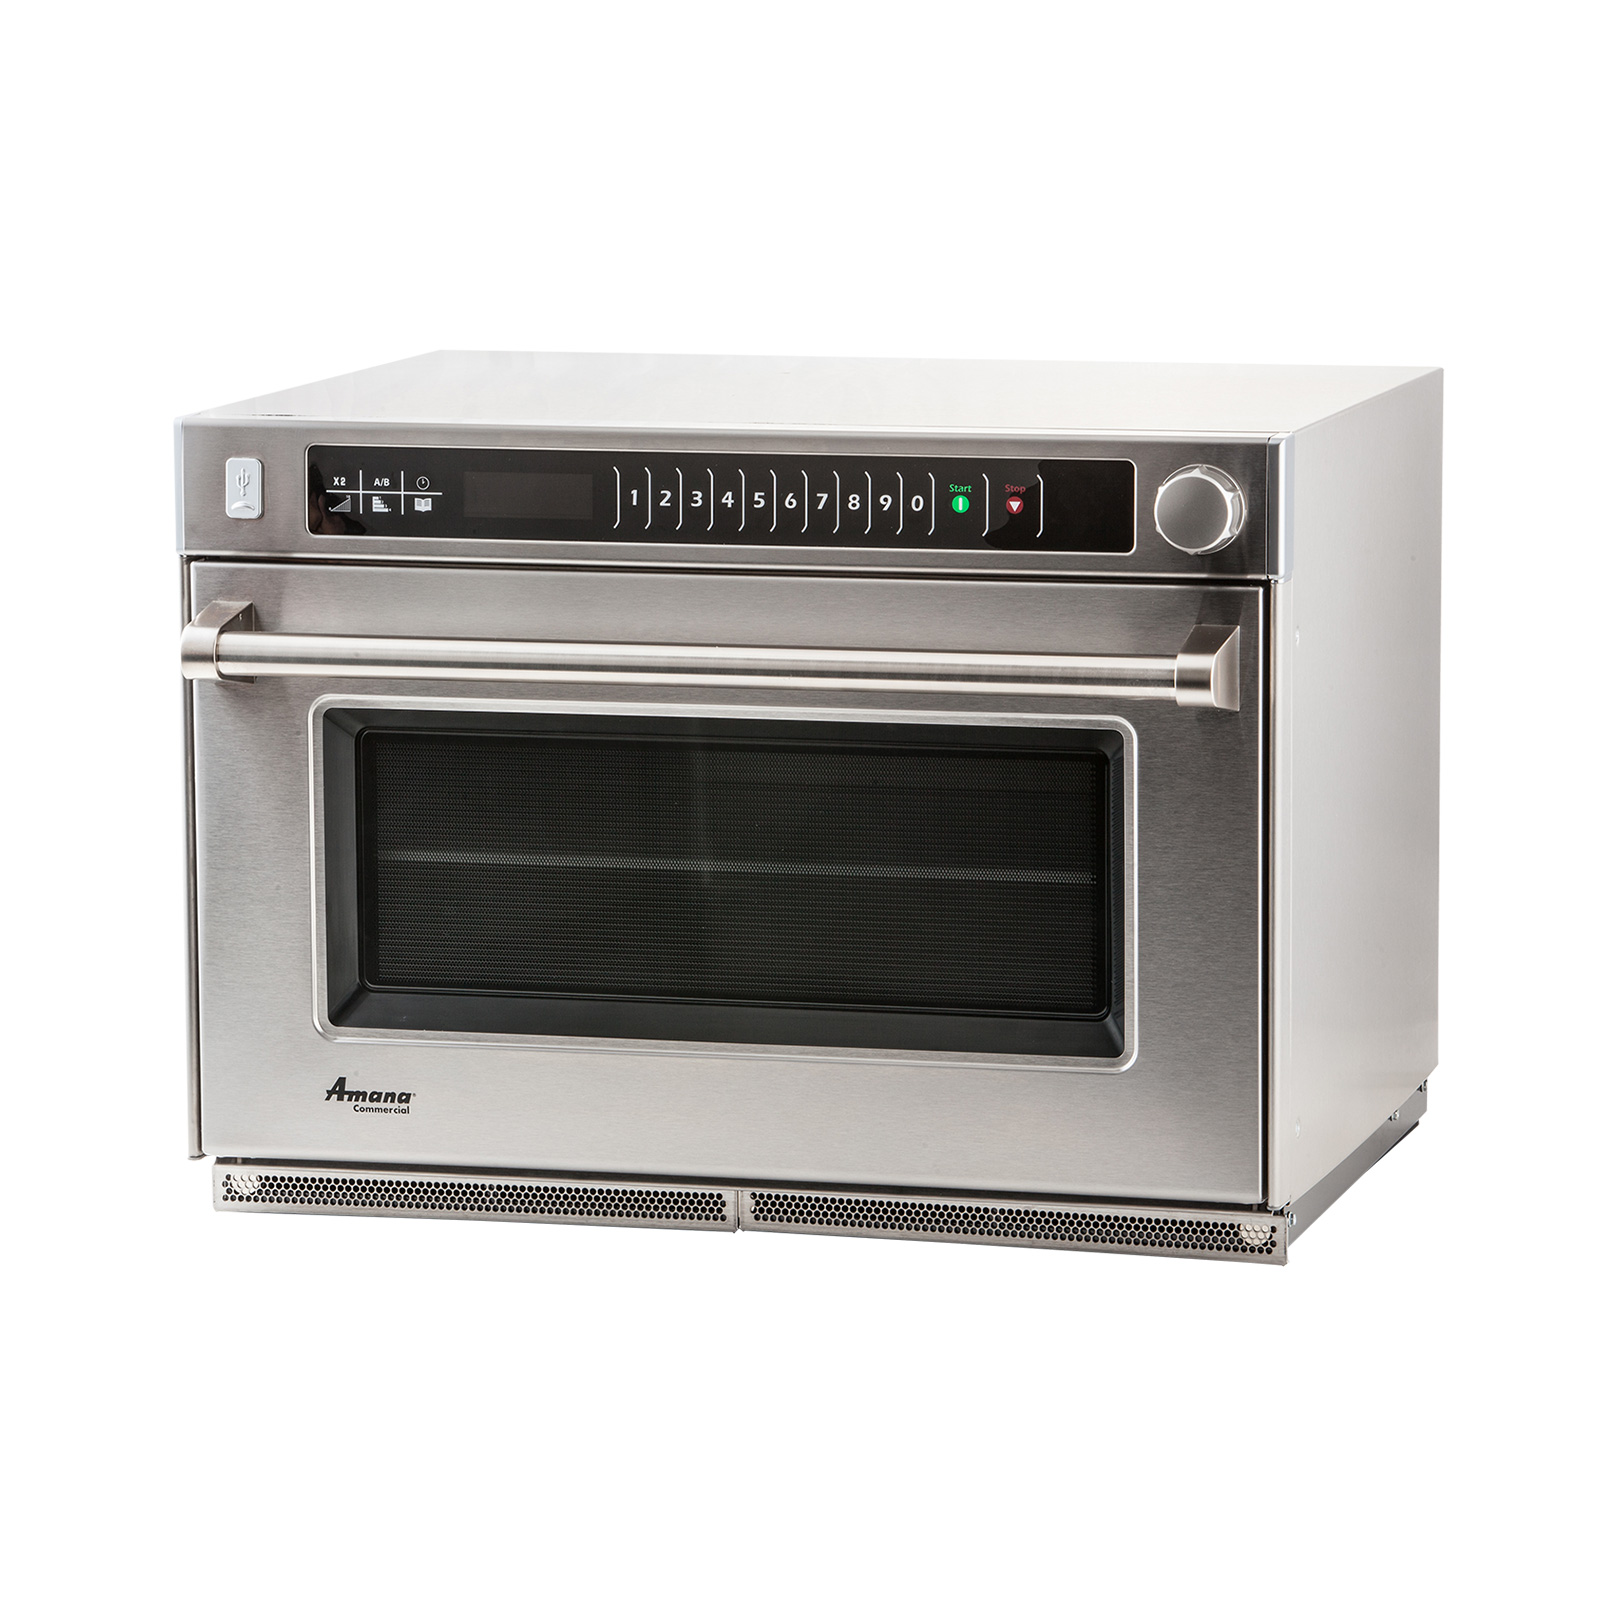 Amana AMSO35 Microwave Oven